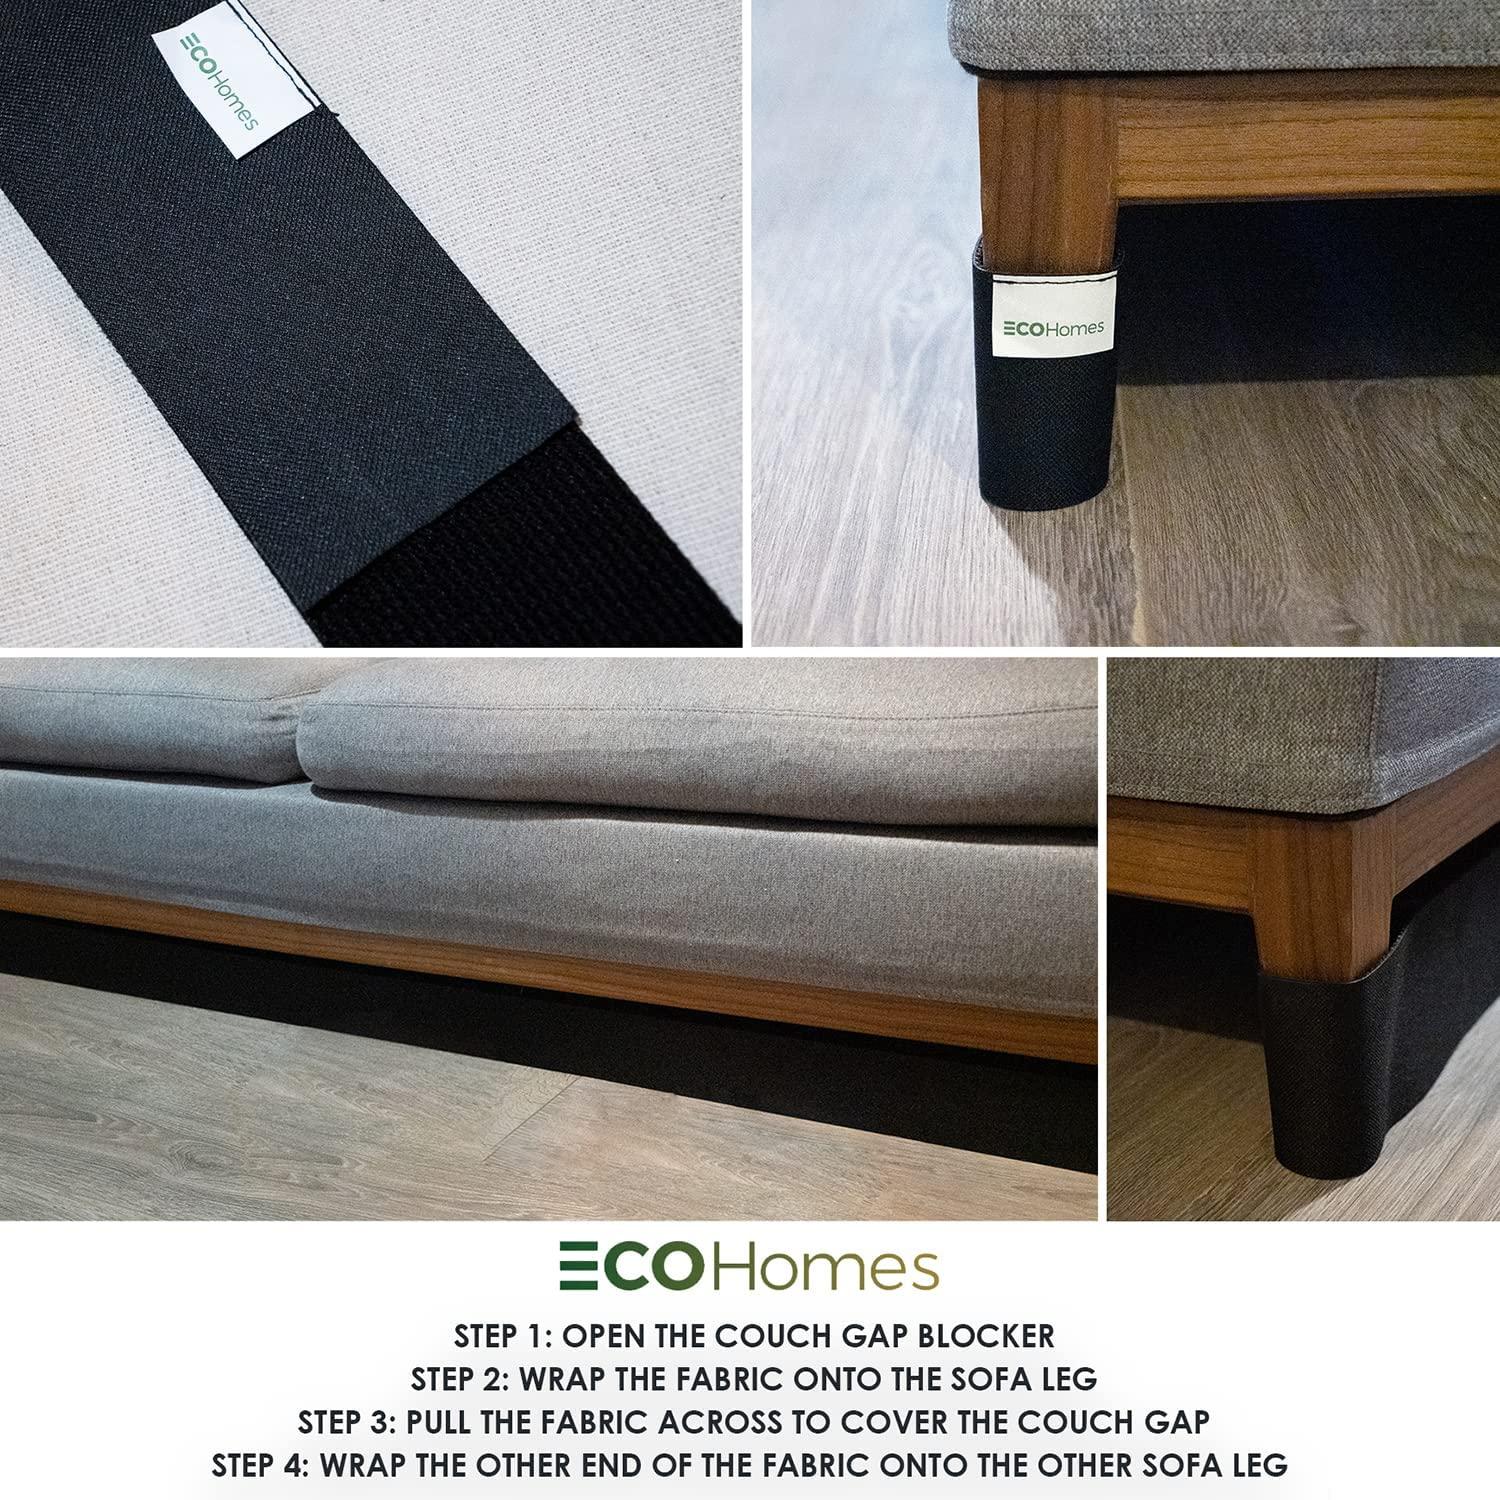 ECOHomes Under Couch Guards Toy Blocker - Barrier for Under Sofa, Bed & Furniture Bottom Stop Things from Going Under | Easy to Install Gap Bumper